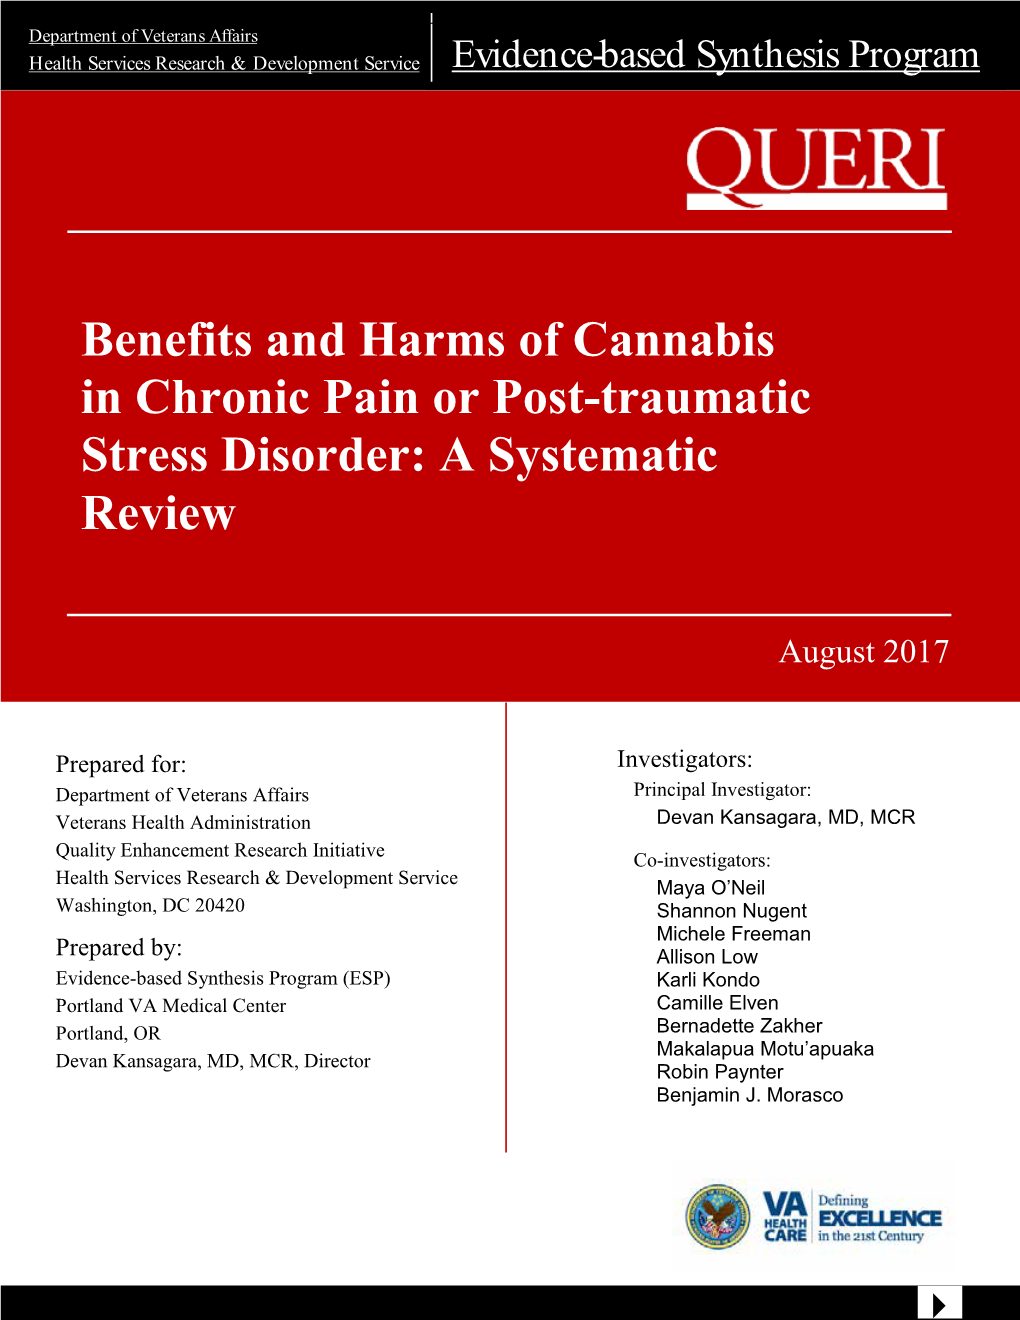 Benefits and Harms of Cannabis in Chronic Pain Or Post-Traumatic Stress Disorder: a Systematic Review